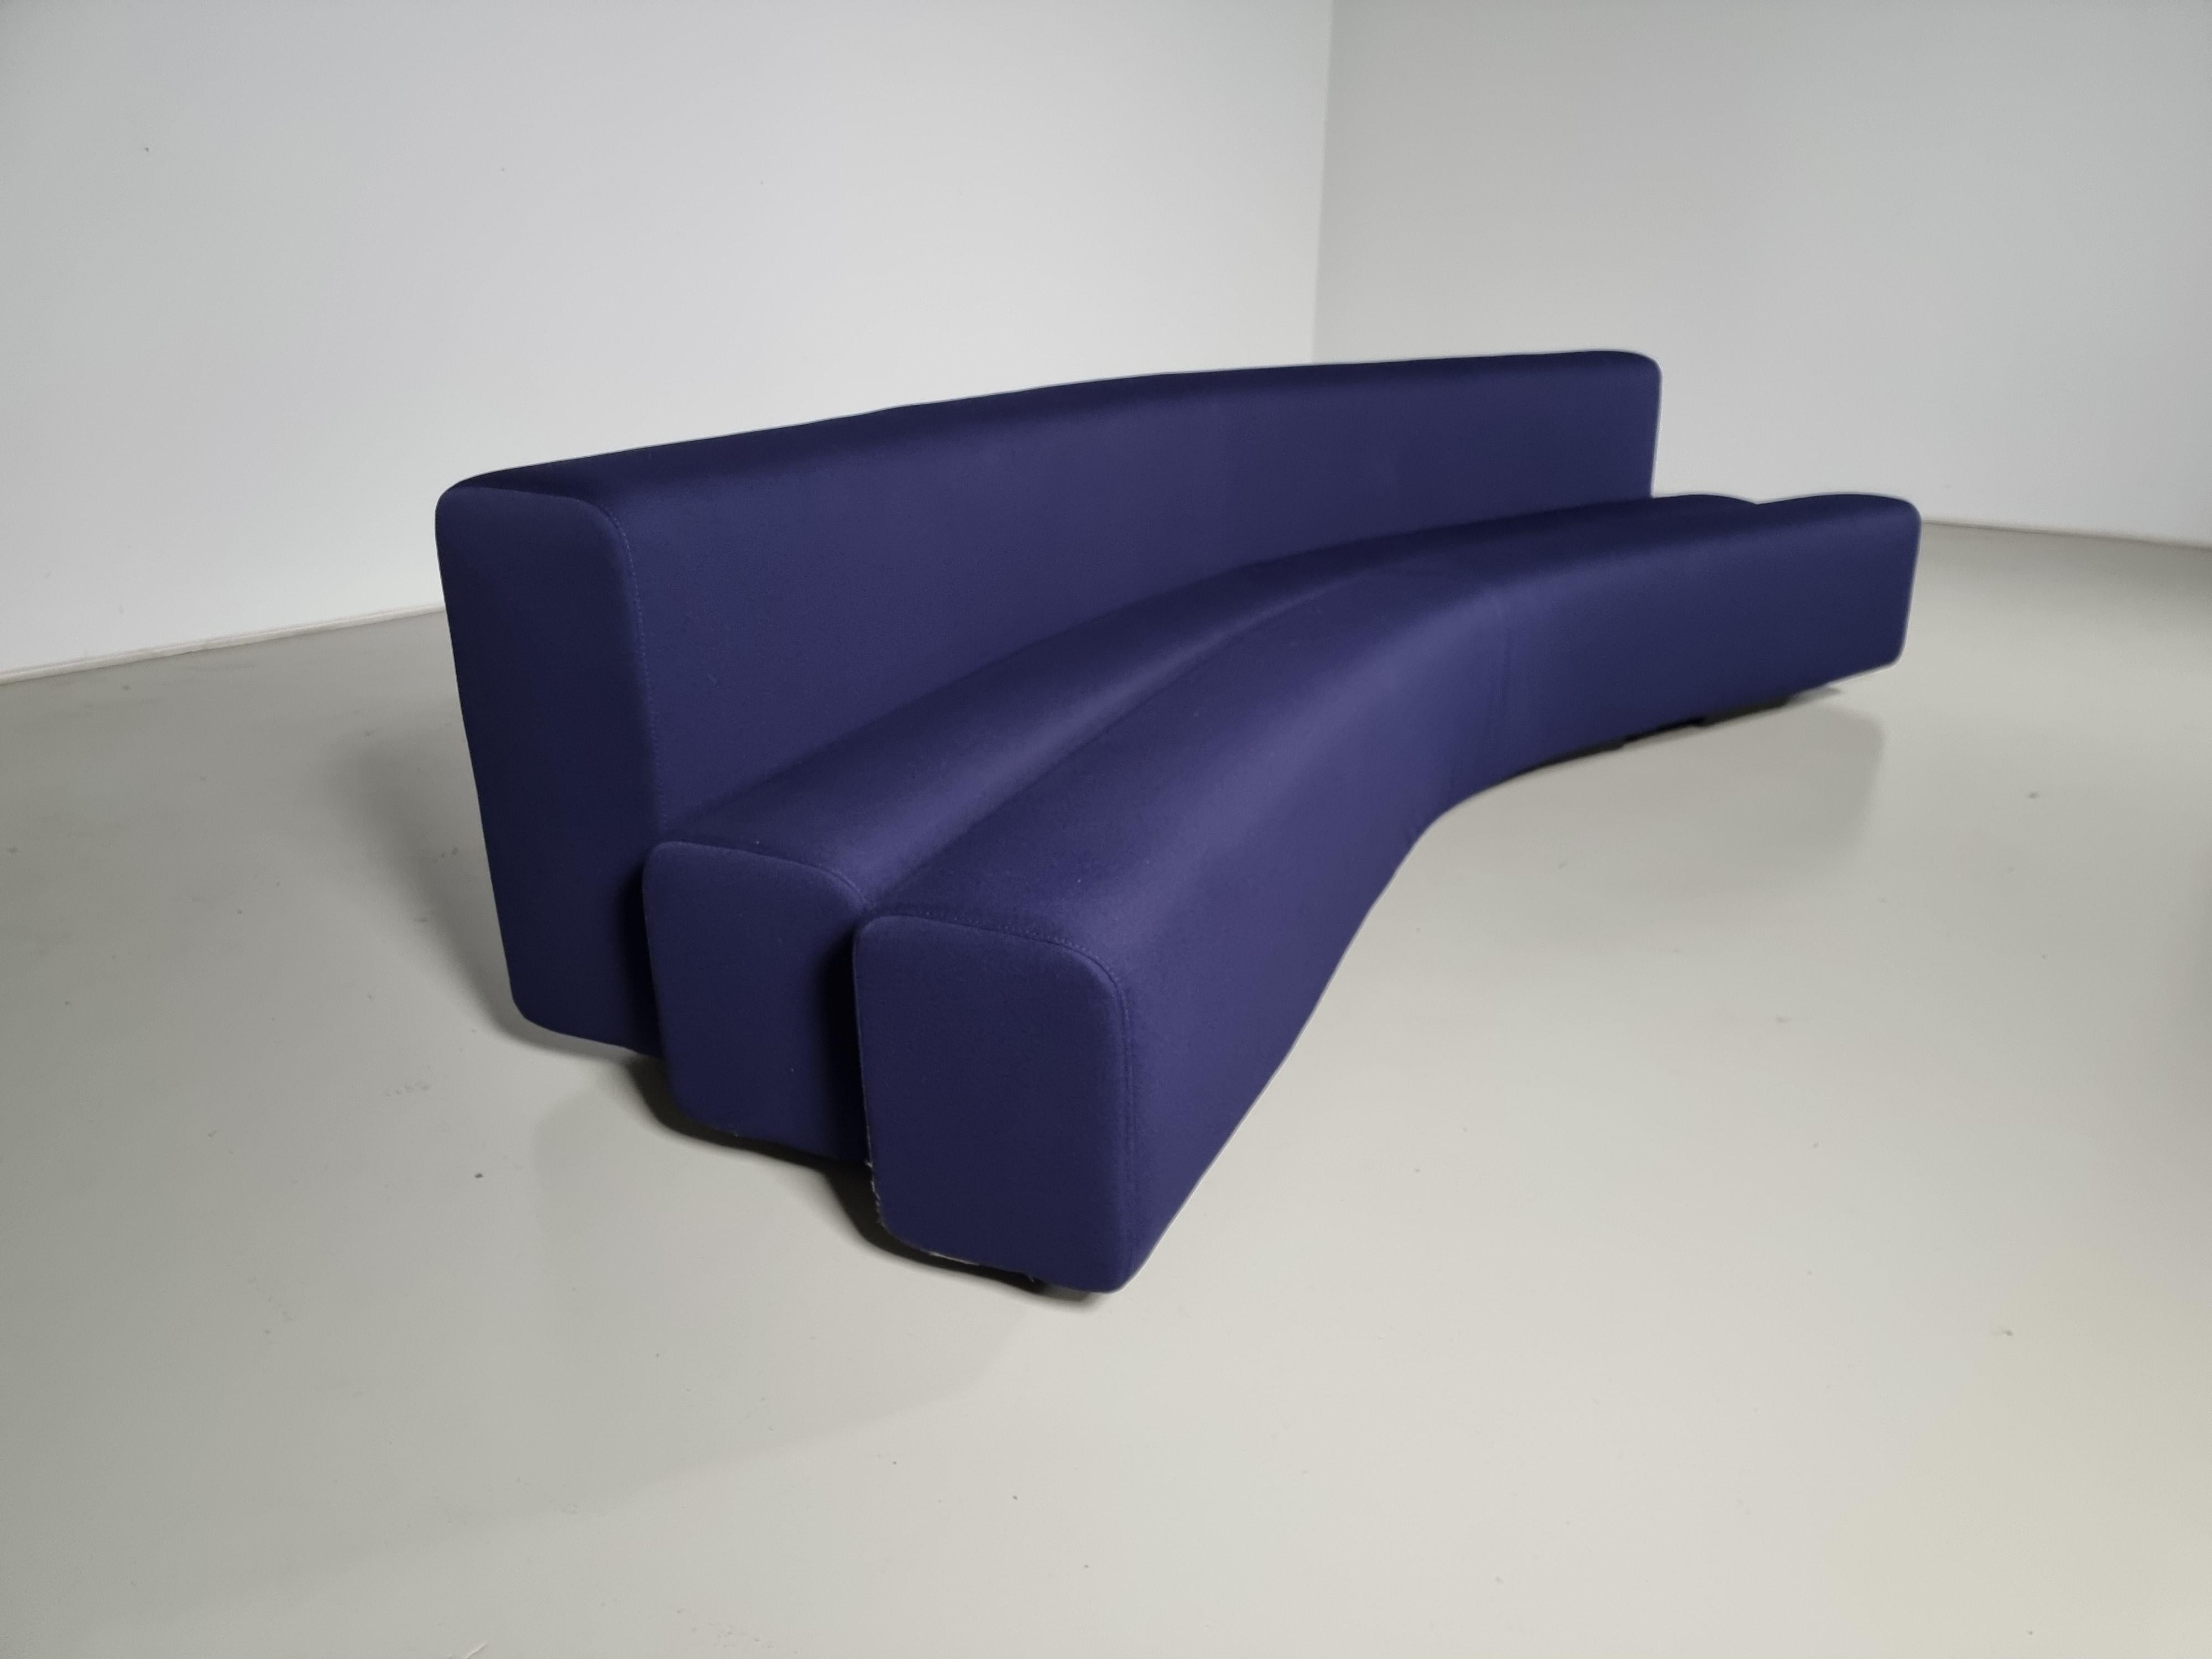 Modular articulated and adjustable sofa system, comprised of a back and 2 seats floating on an adjustable steel frame. Designed by Pierre Paulin in 1967 for the 1970 World Expo in Osaka, Japan. Now edited by La Cividina in 2013, Made in Italy.